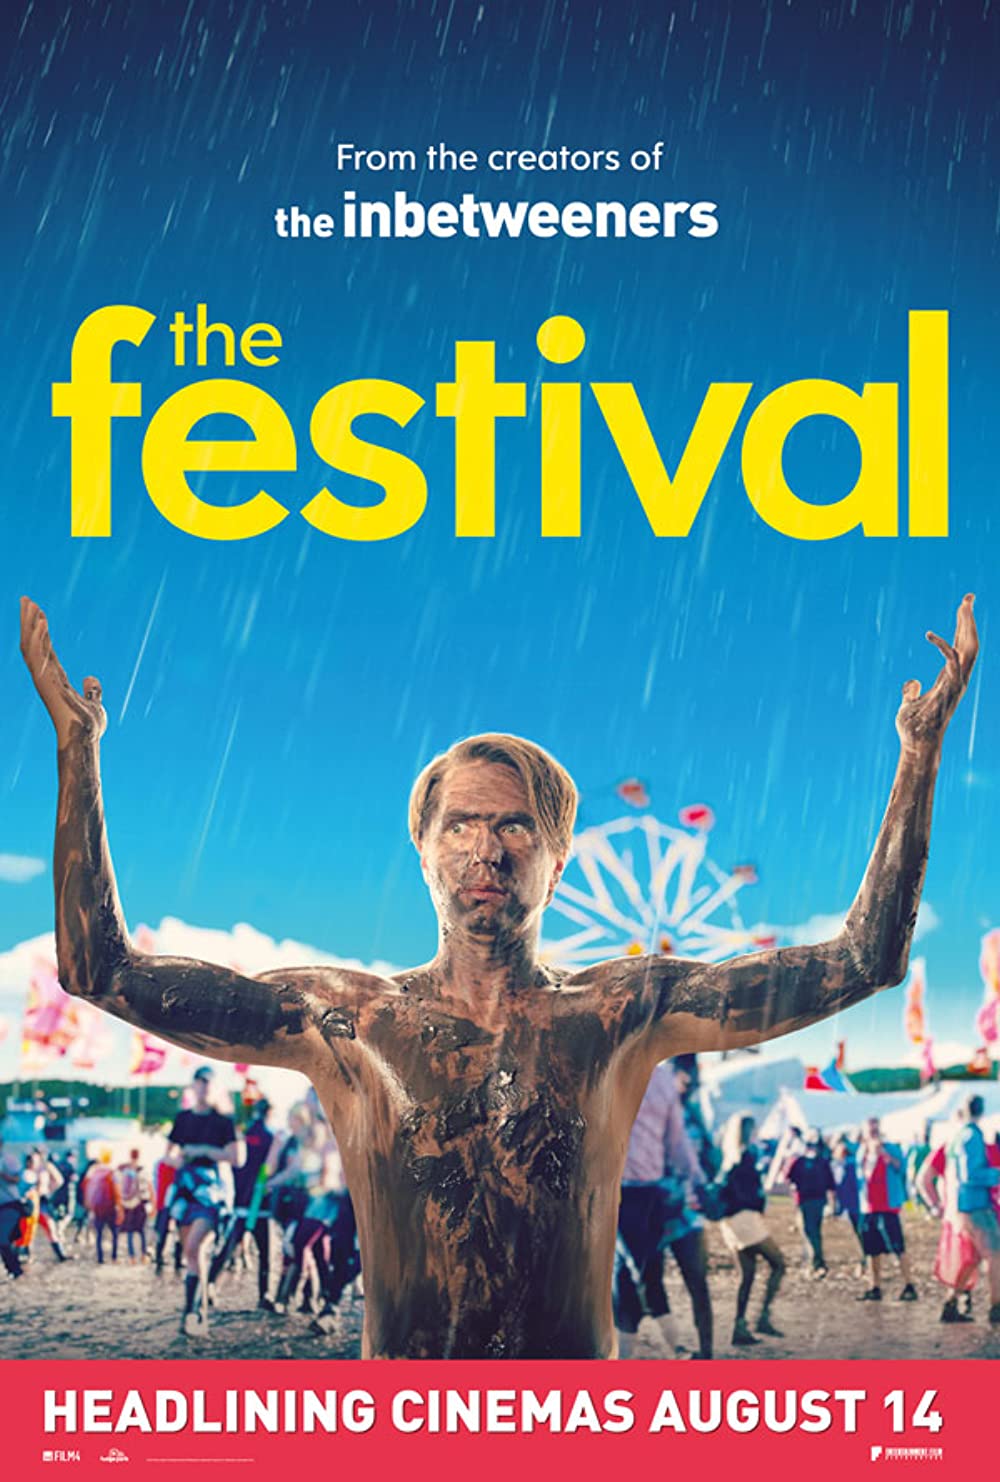 Poster with text that reads "From the creators of the inbetweeners, the festival" above a man covered in mud underneath.